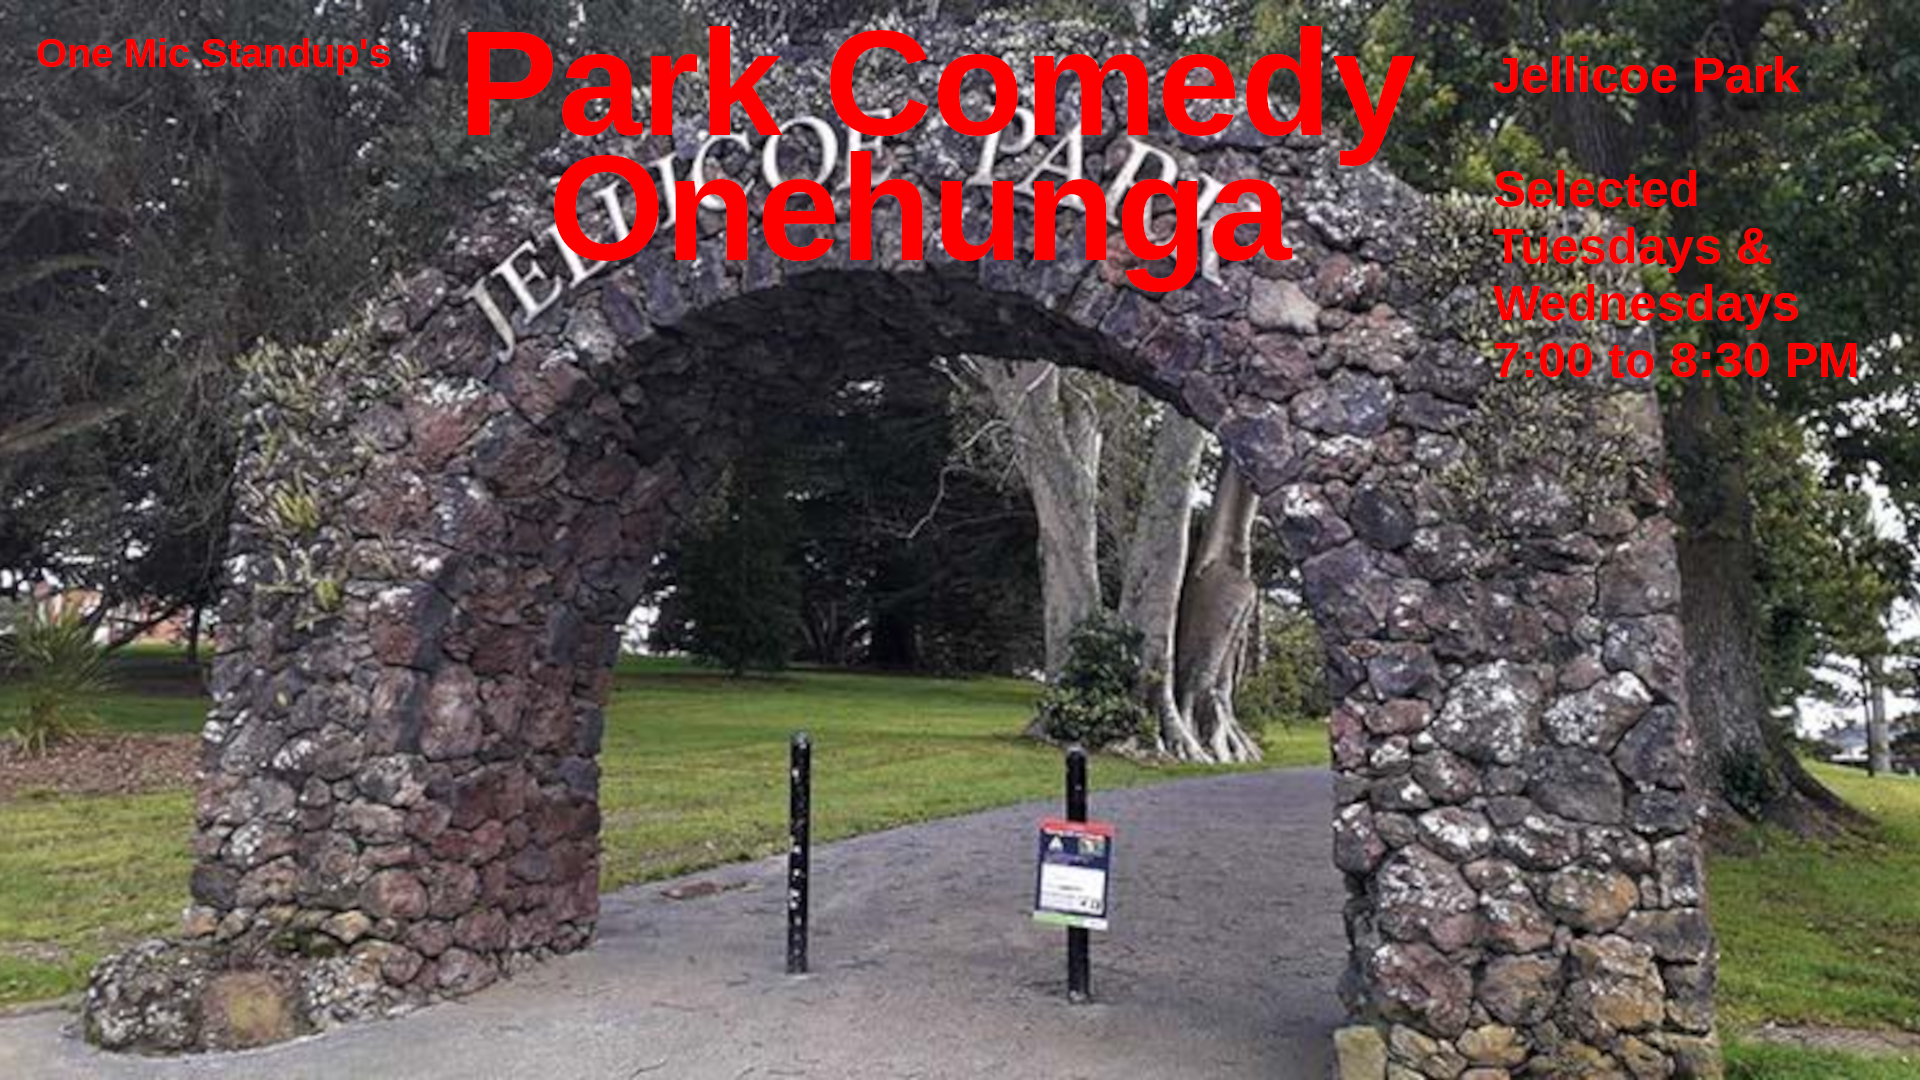 A stone arch with the words "One Mic Stand-up;s Park Comedy Jellicoe Park selected Tuesdays and Thursdays 7 to 8:30 PM